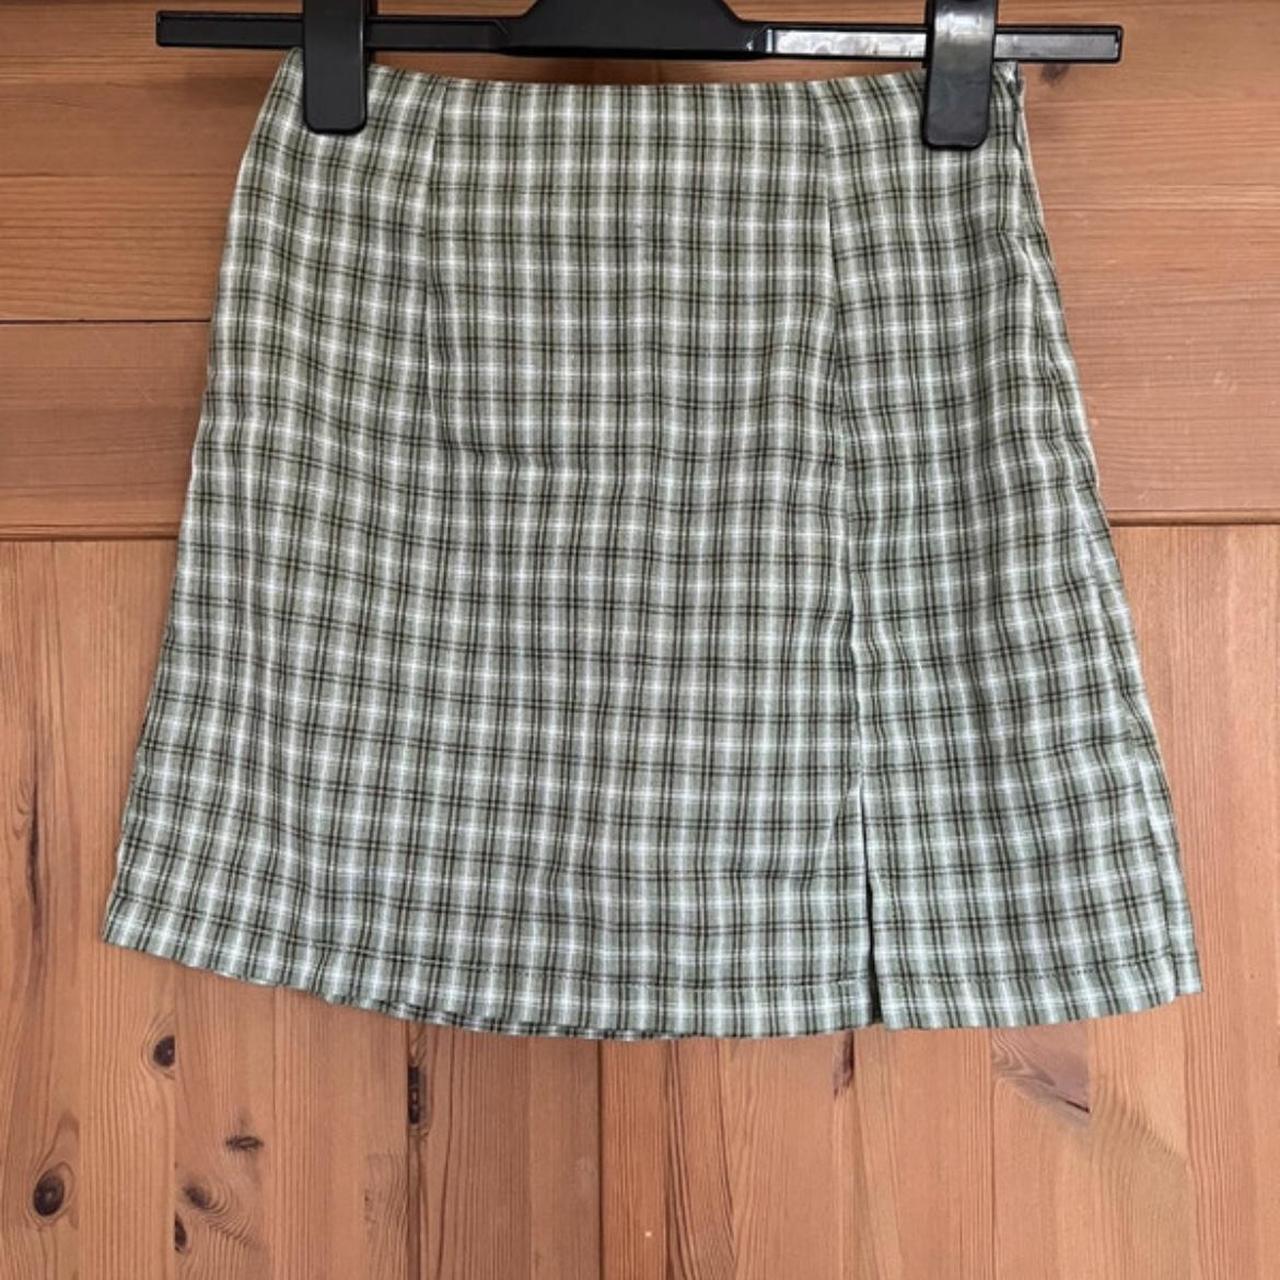 Princess Polly miss sally green checked skirt Size... - Depop